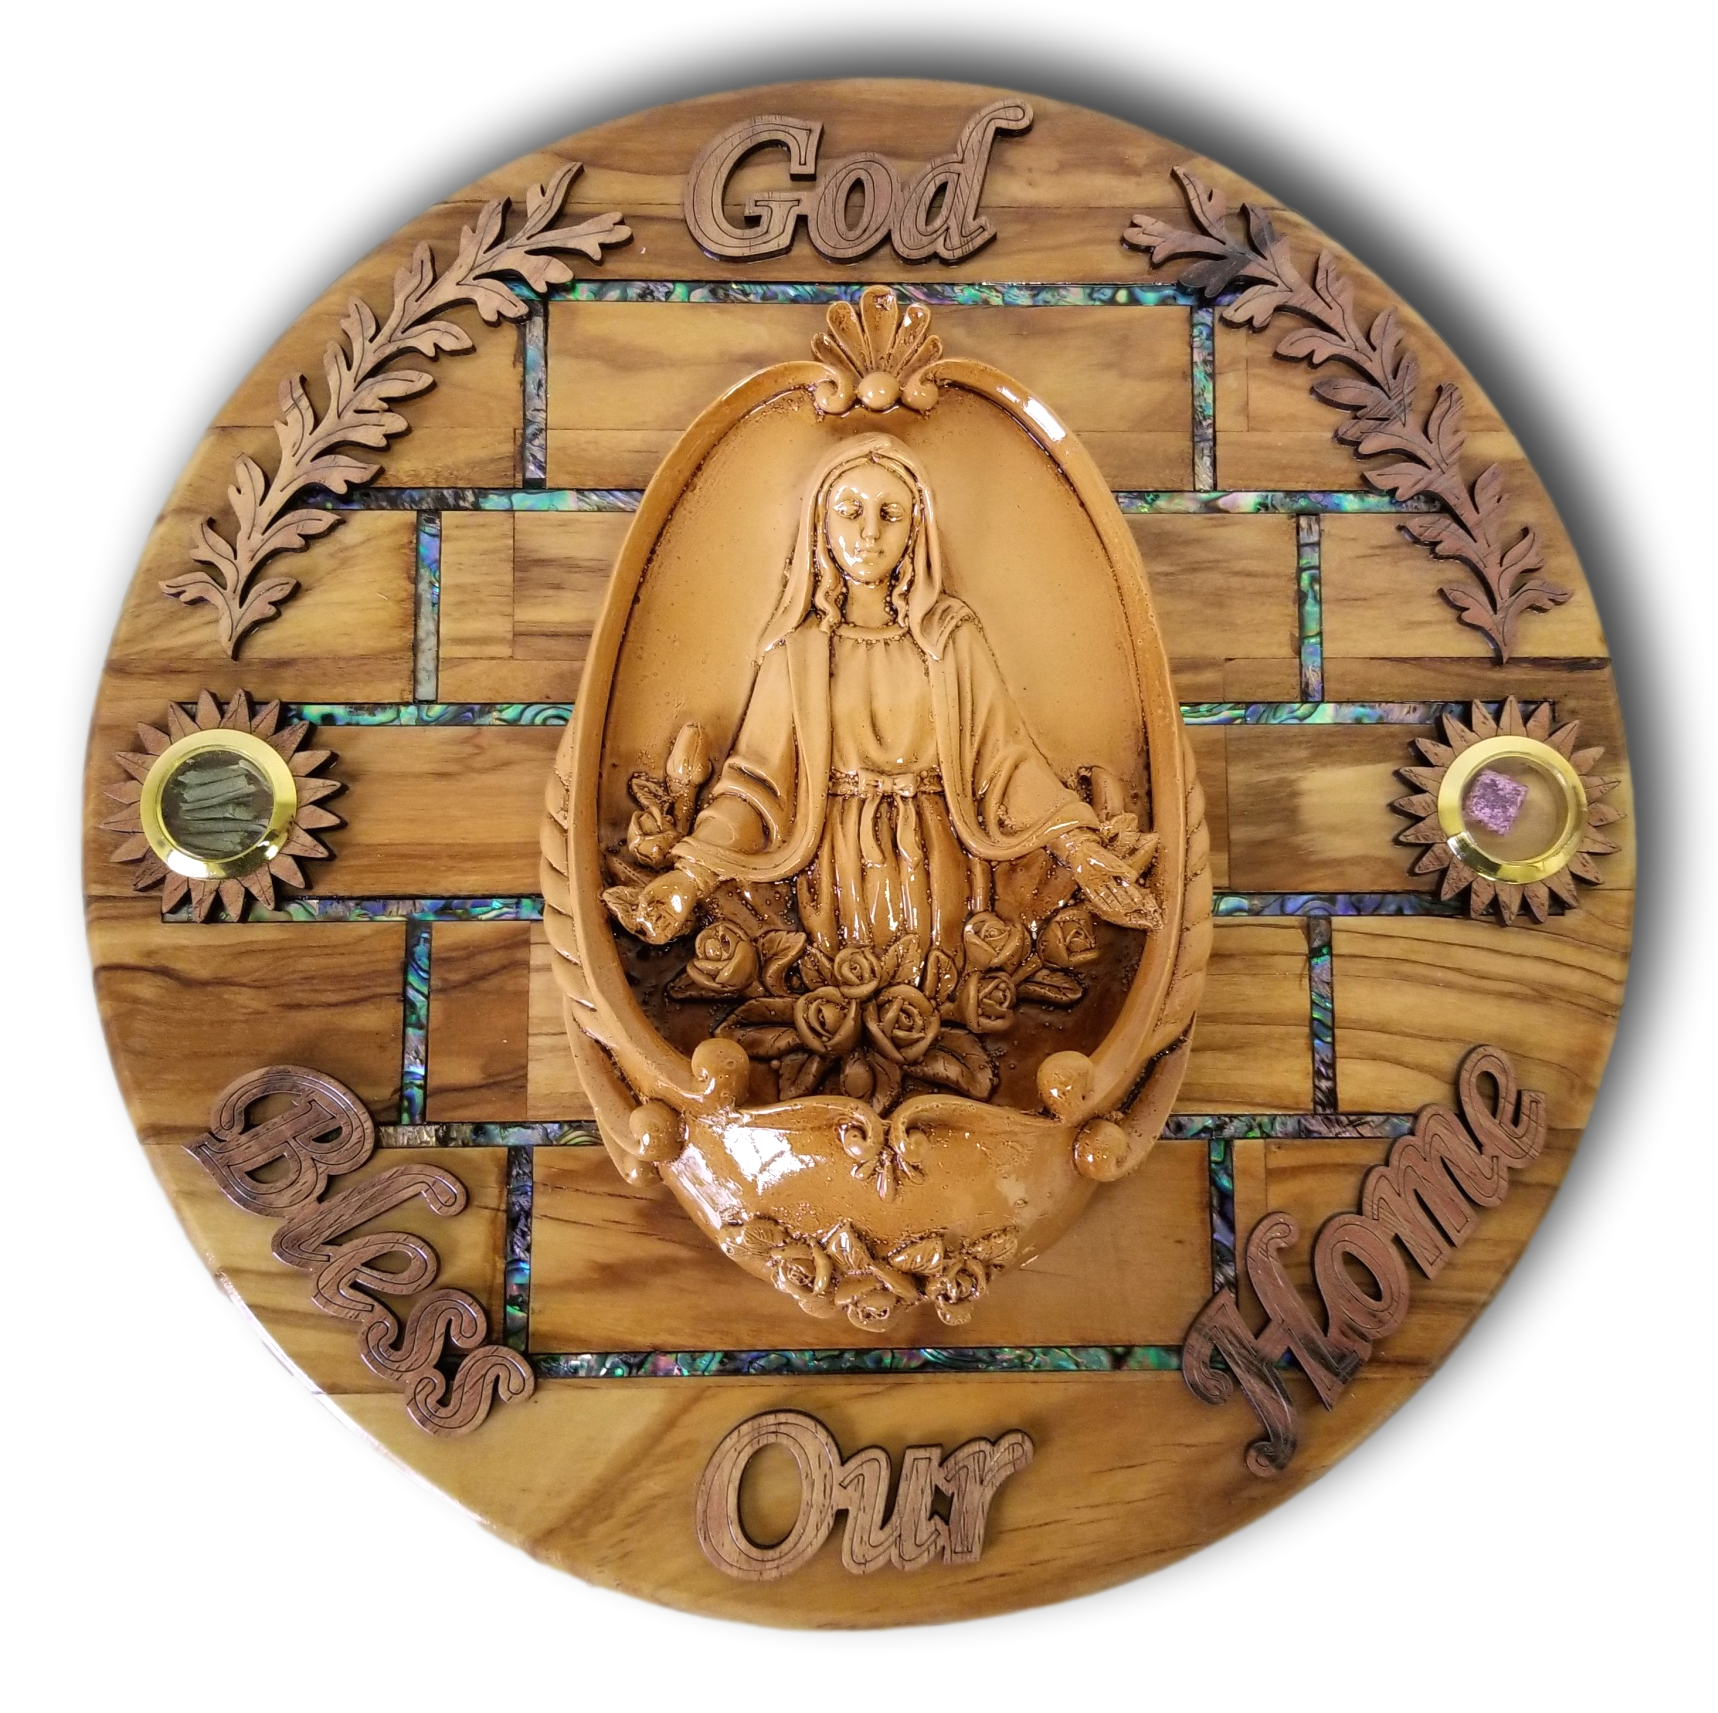 Round plaque with Abalone seashells, Porcelain figures, and holy items